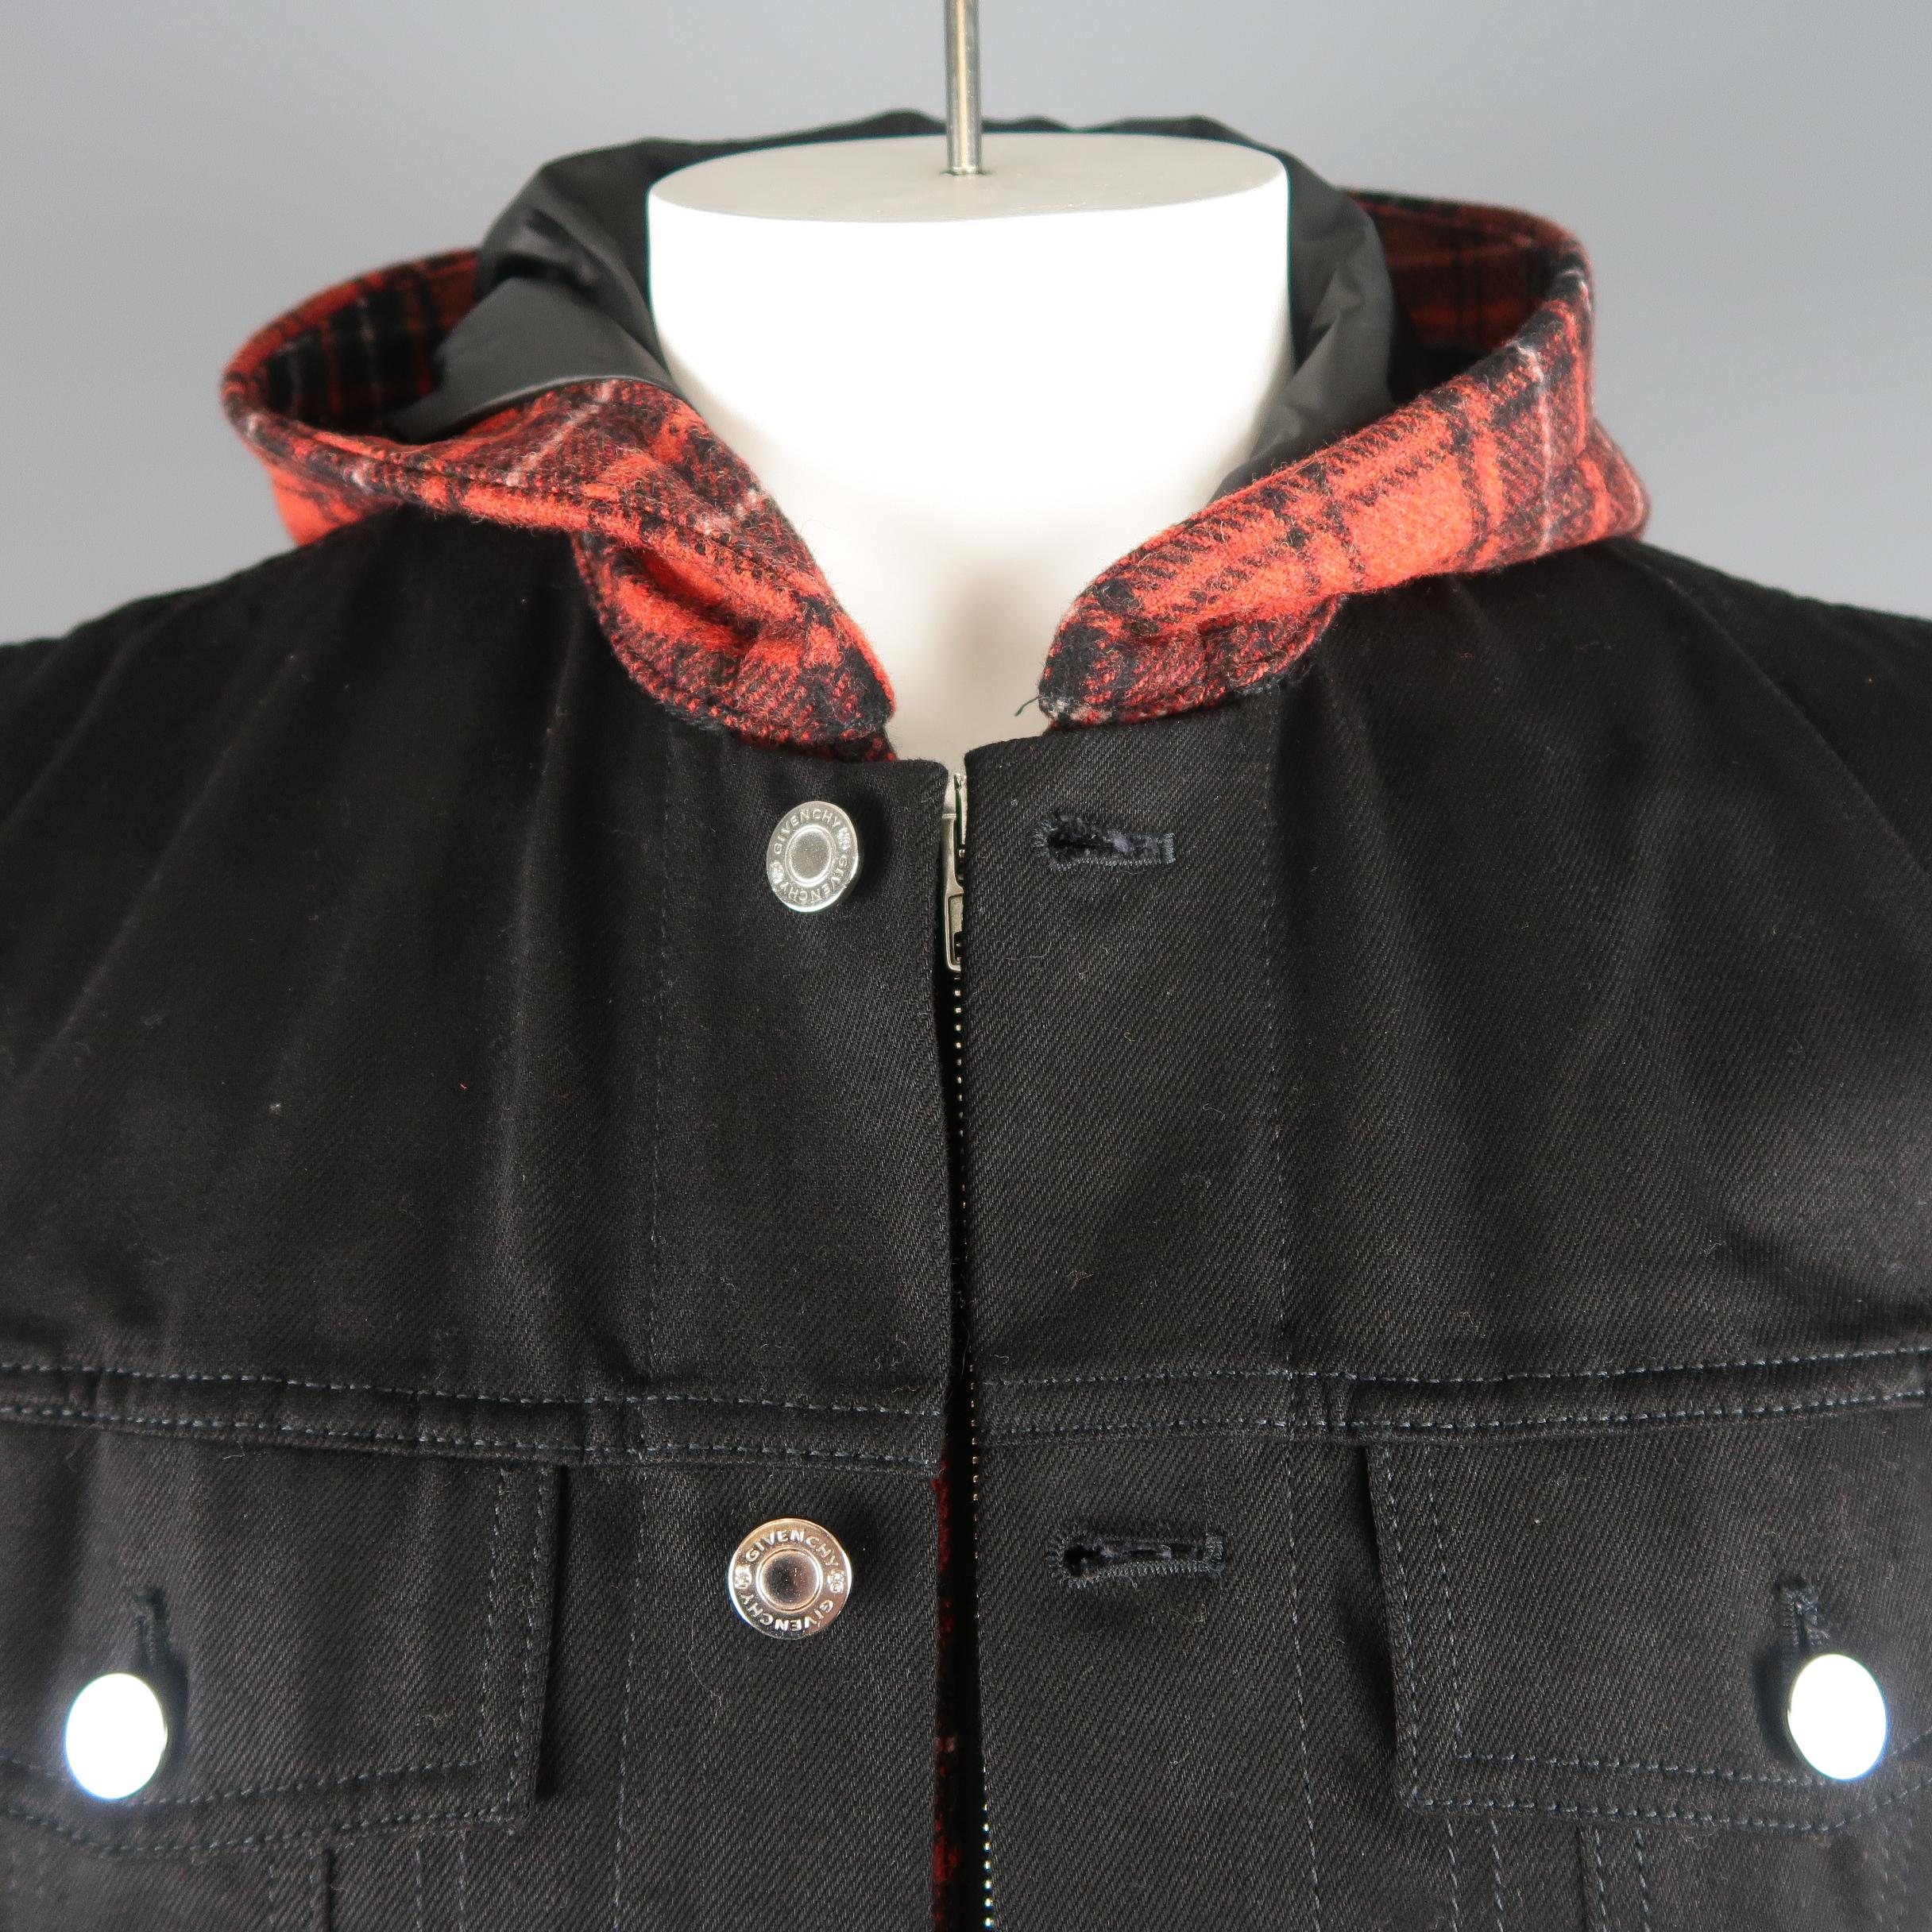 Givenchy By Riccardo Tisci jacket features a classic black cotton denim trucker jacket with sewn in red plaid wool flannel hooded, zip layer. Made in Portugal.
 
Excellent Pre-Owned Condition.
Marked: L
 
Measurements:
 
Shoulder: 17 in.
Chest: 44